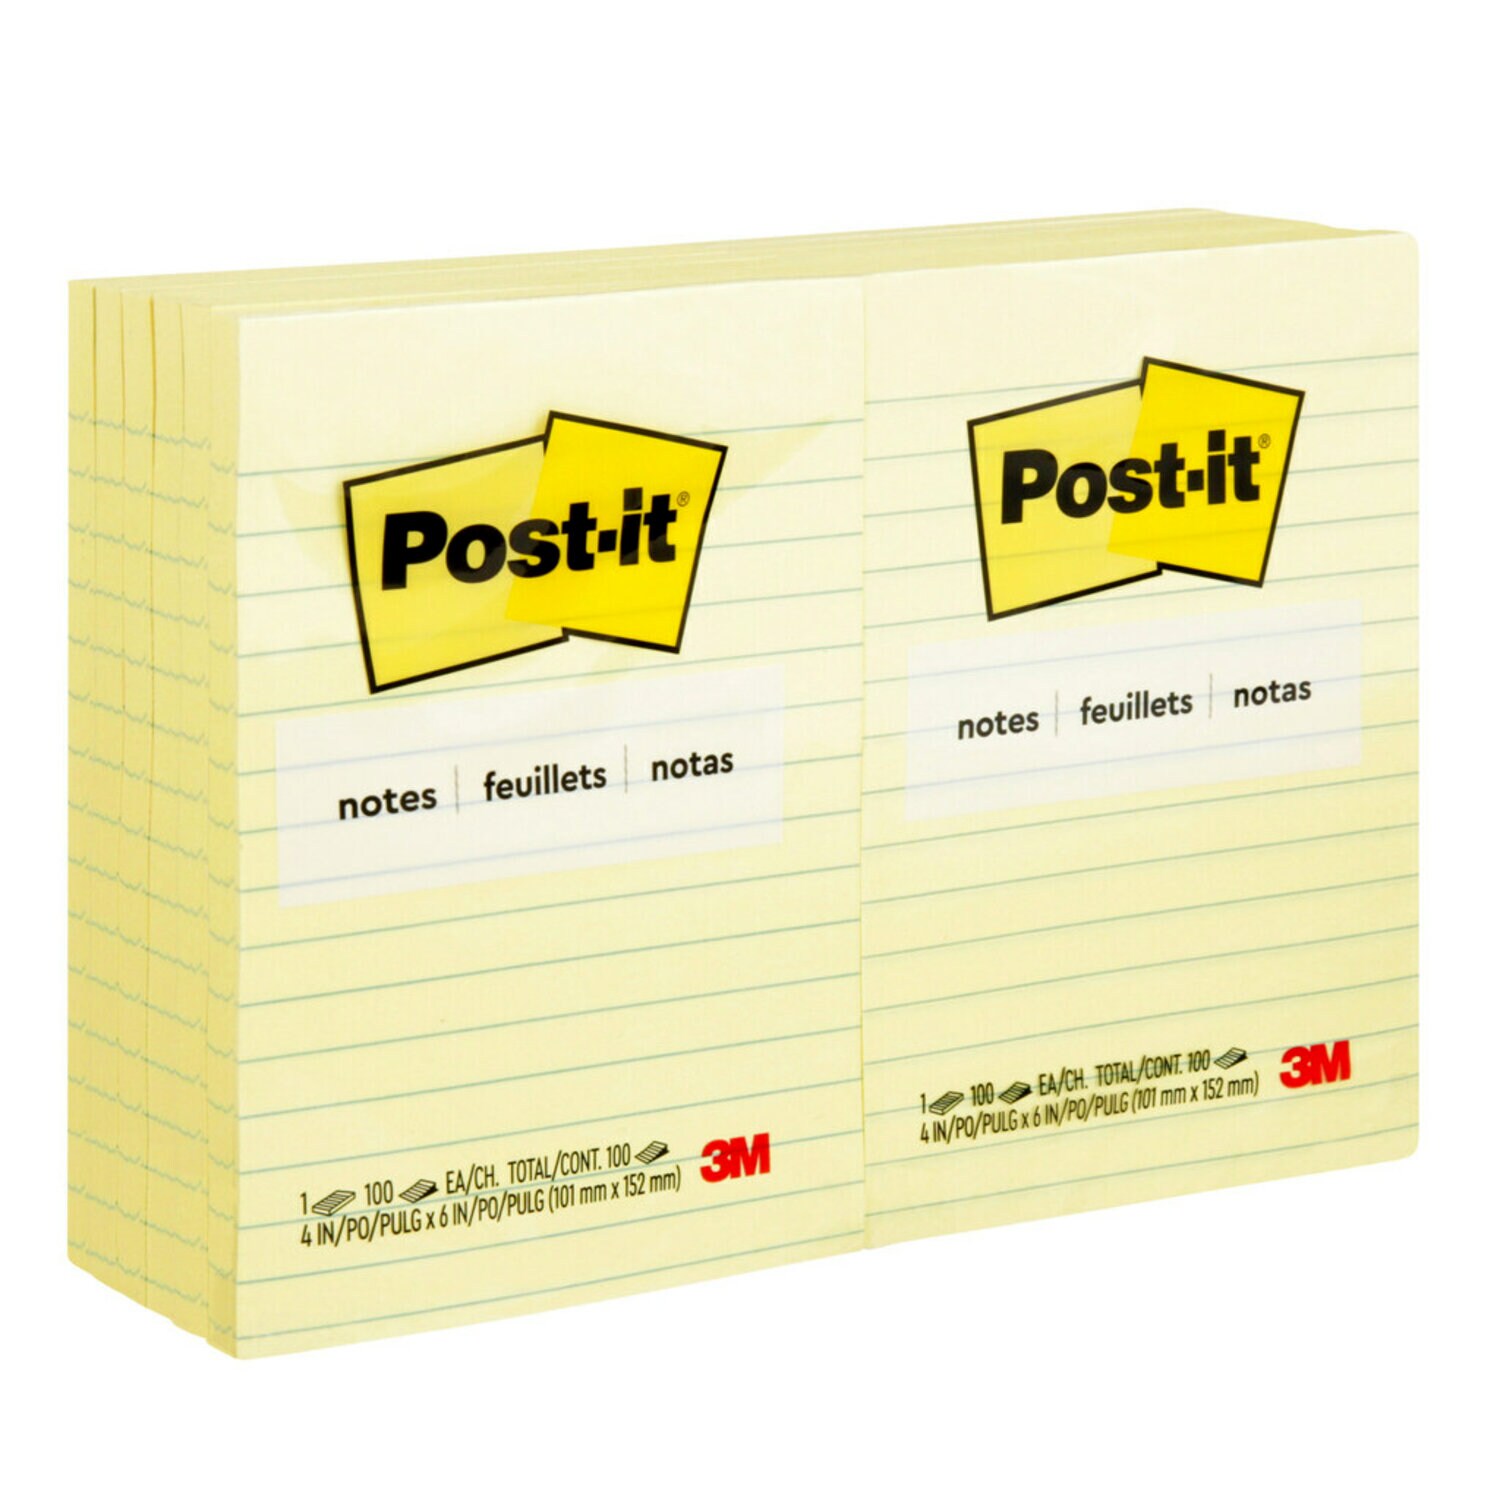 7100229681 - Post-it Notes 660, 4 in x 6 in (101 mm x 152 mm)